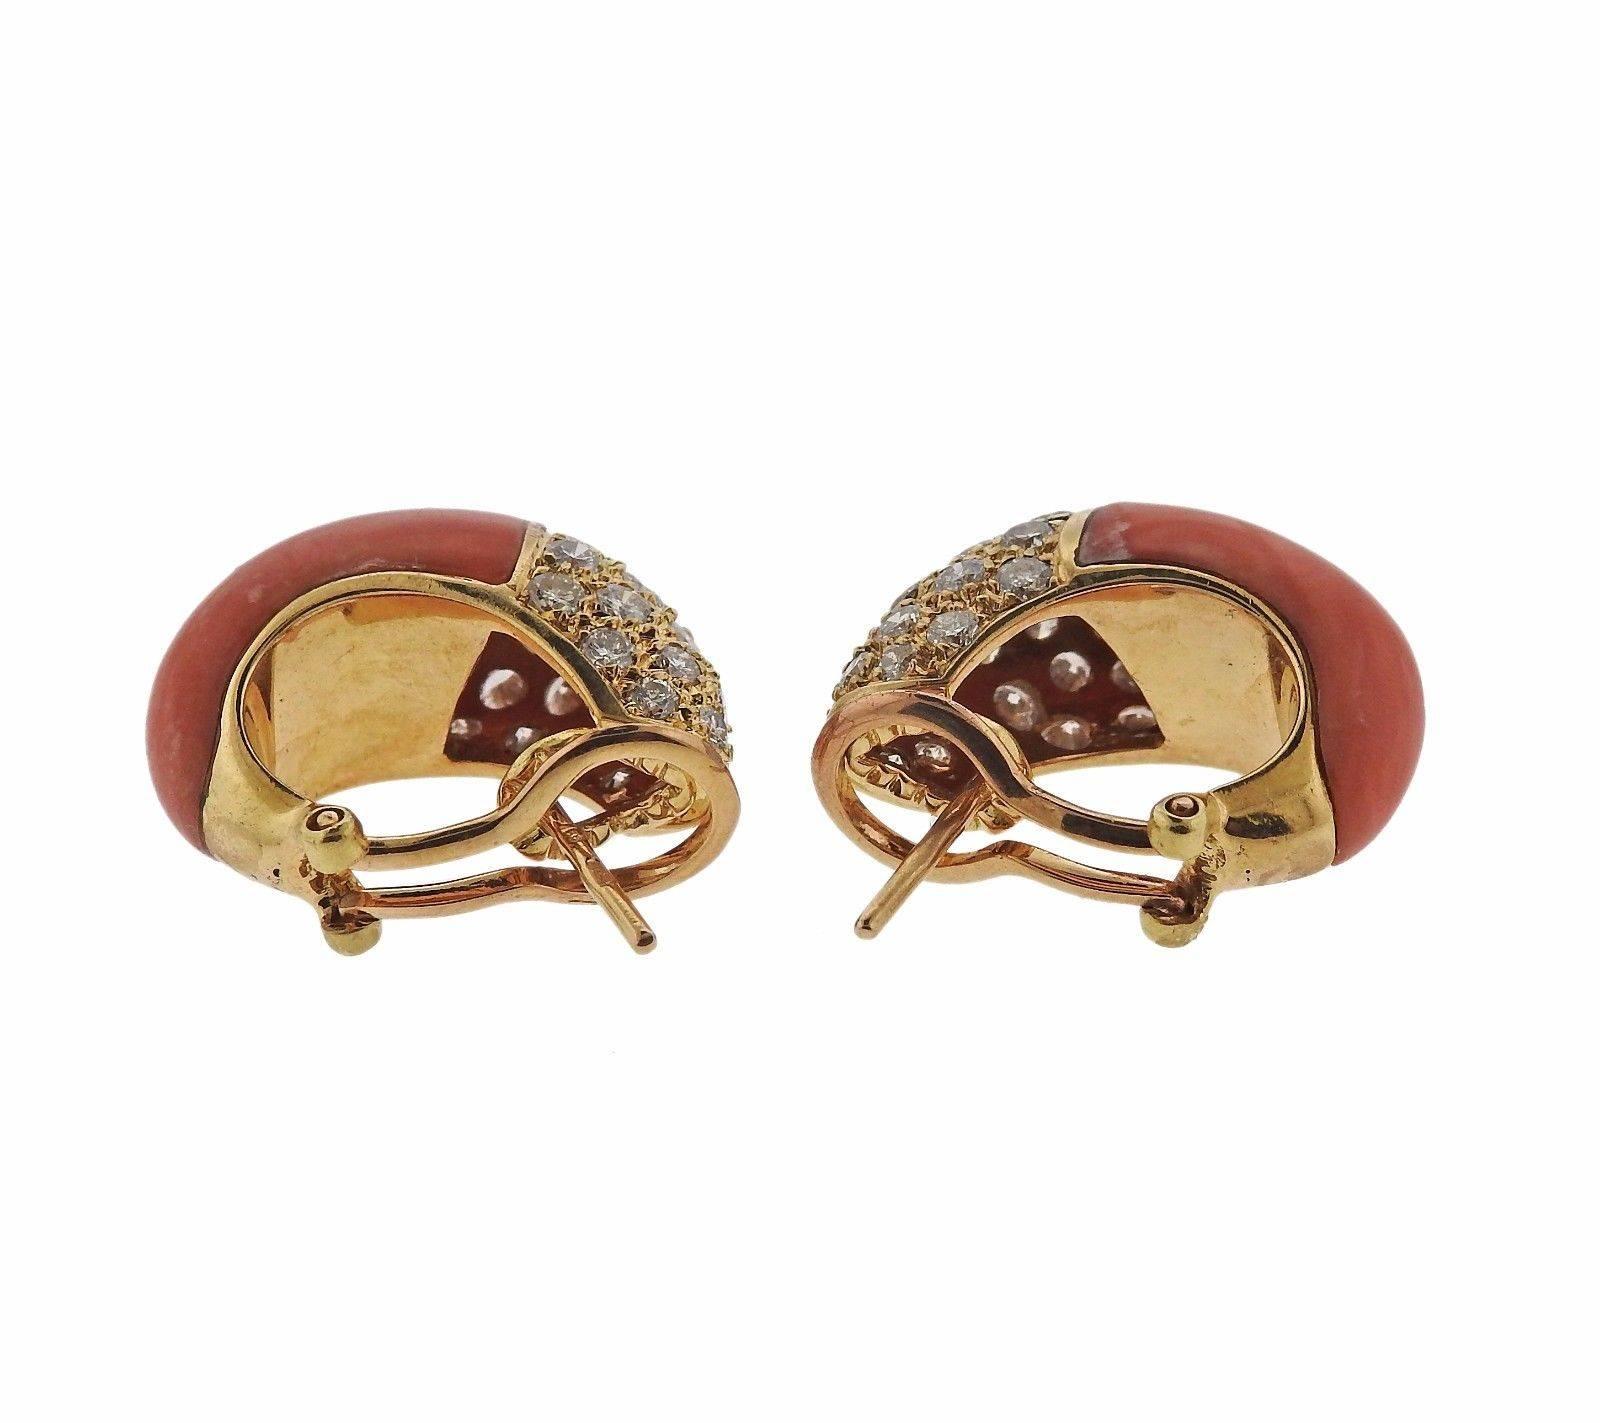 A pair of 18k yellow gold earrings set with coral and approximately 2.50ctw of VS-SI1/H diamonds.  The earrings measure 23mm x 10mm and weigh 16.7 grams.